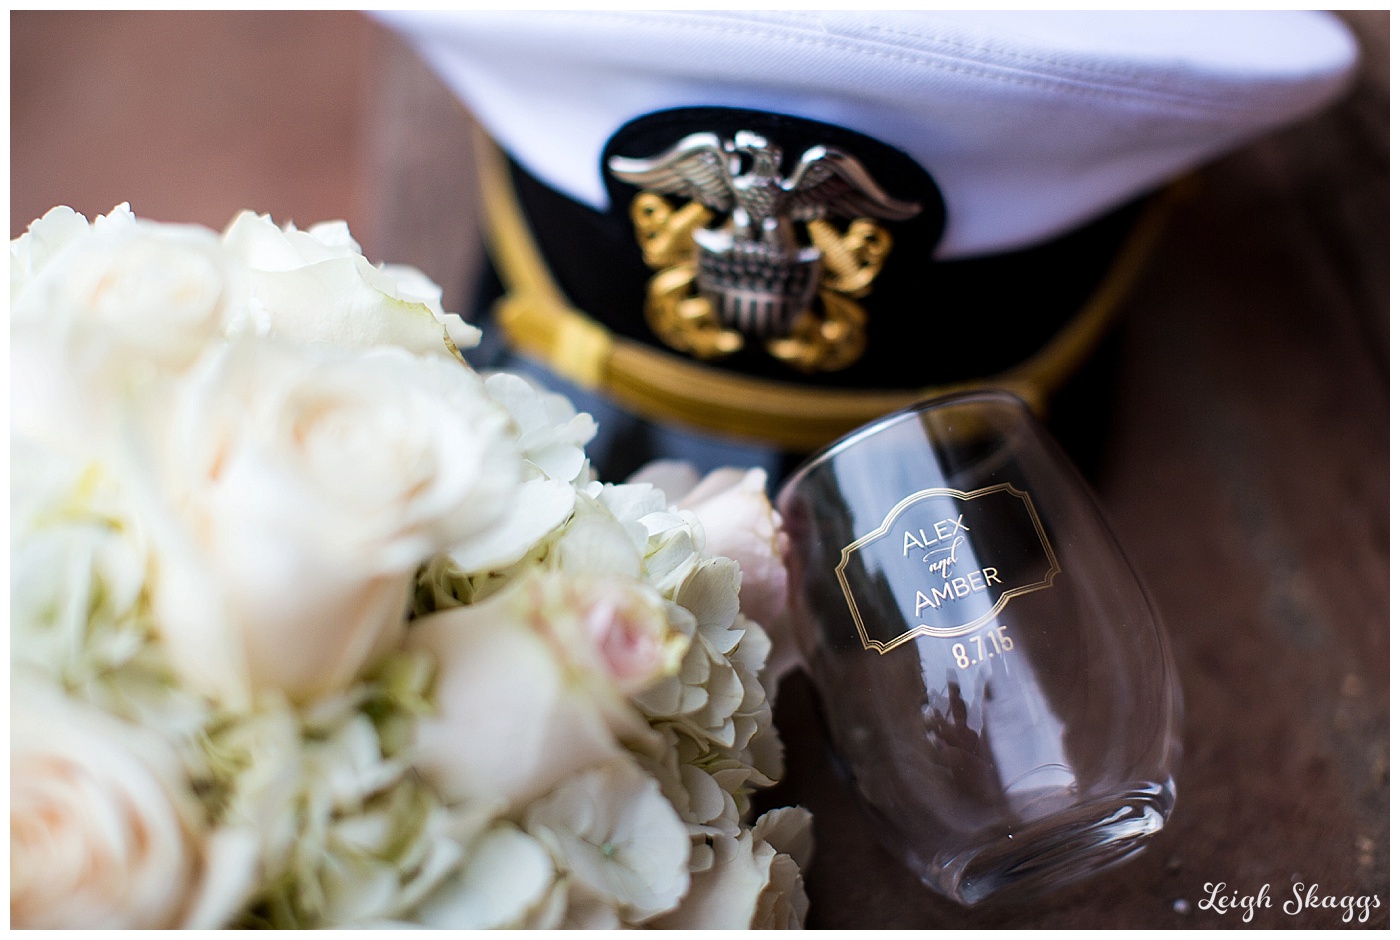 Amber and Alex are Married!!  A Freemason Inn Bed and Breakfast wedding in Norfolk Virginia!